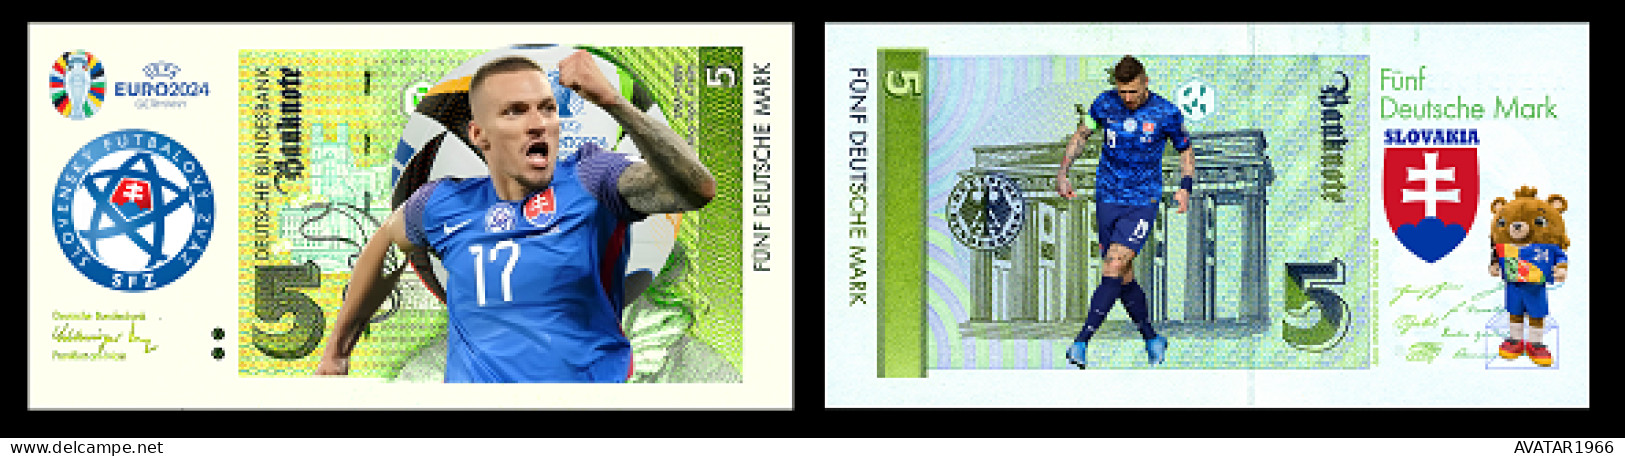 UEFA European Football Championship 2024 Qualified Country Slovakia  8 Pieces Germany Fantasy Paper Money - [15] Commémoratifs & Emissions Spéciales